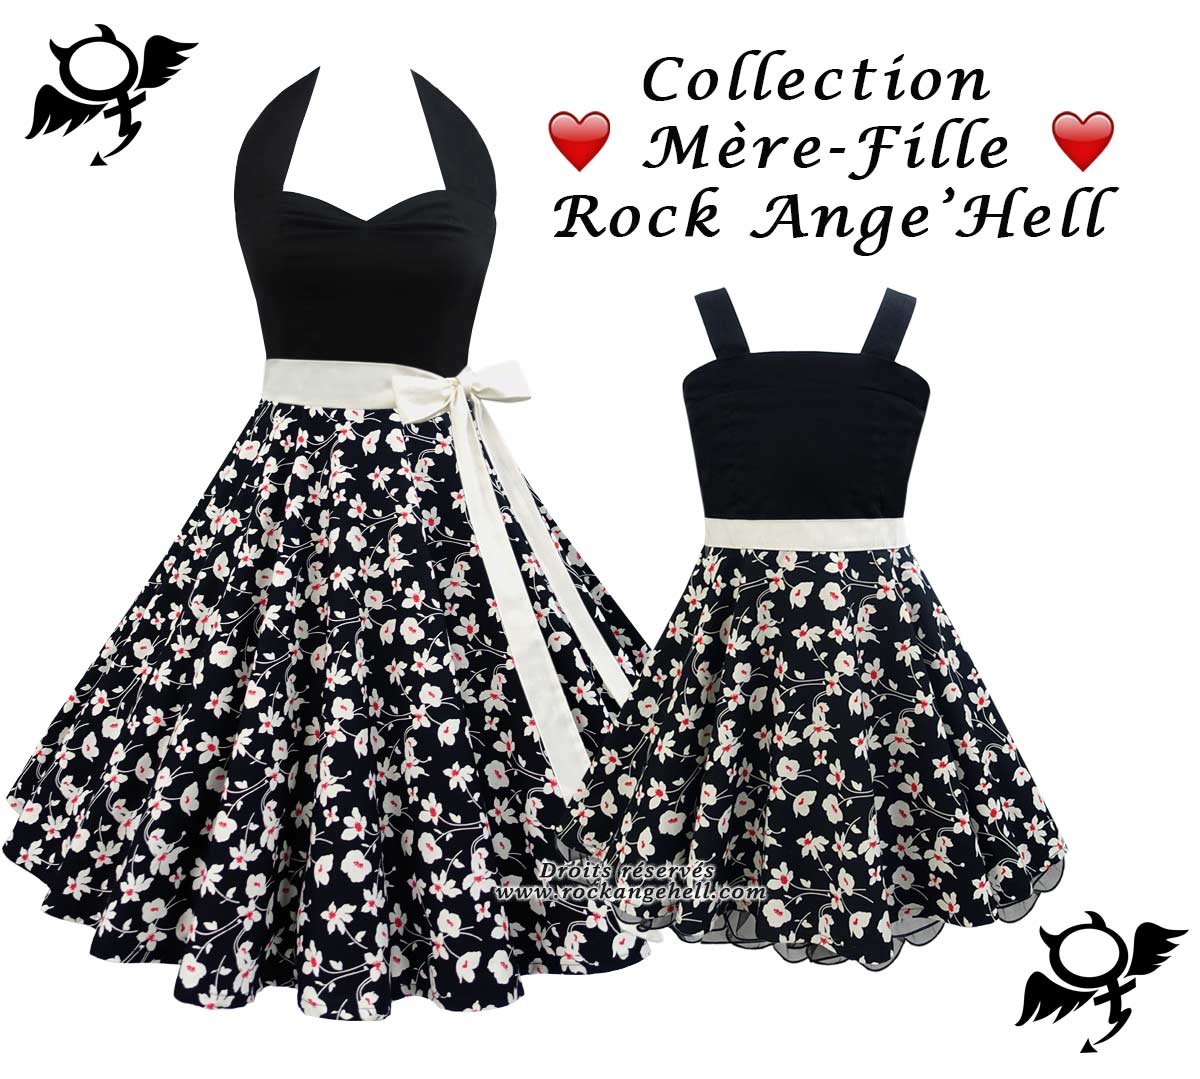 Collection-Rock-AngeHell-Mere-Fille8.jpg